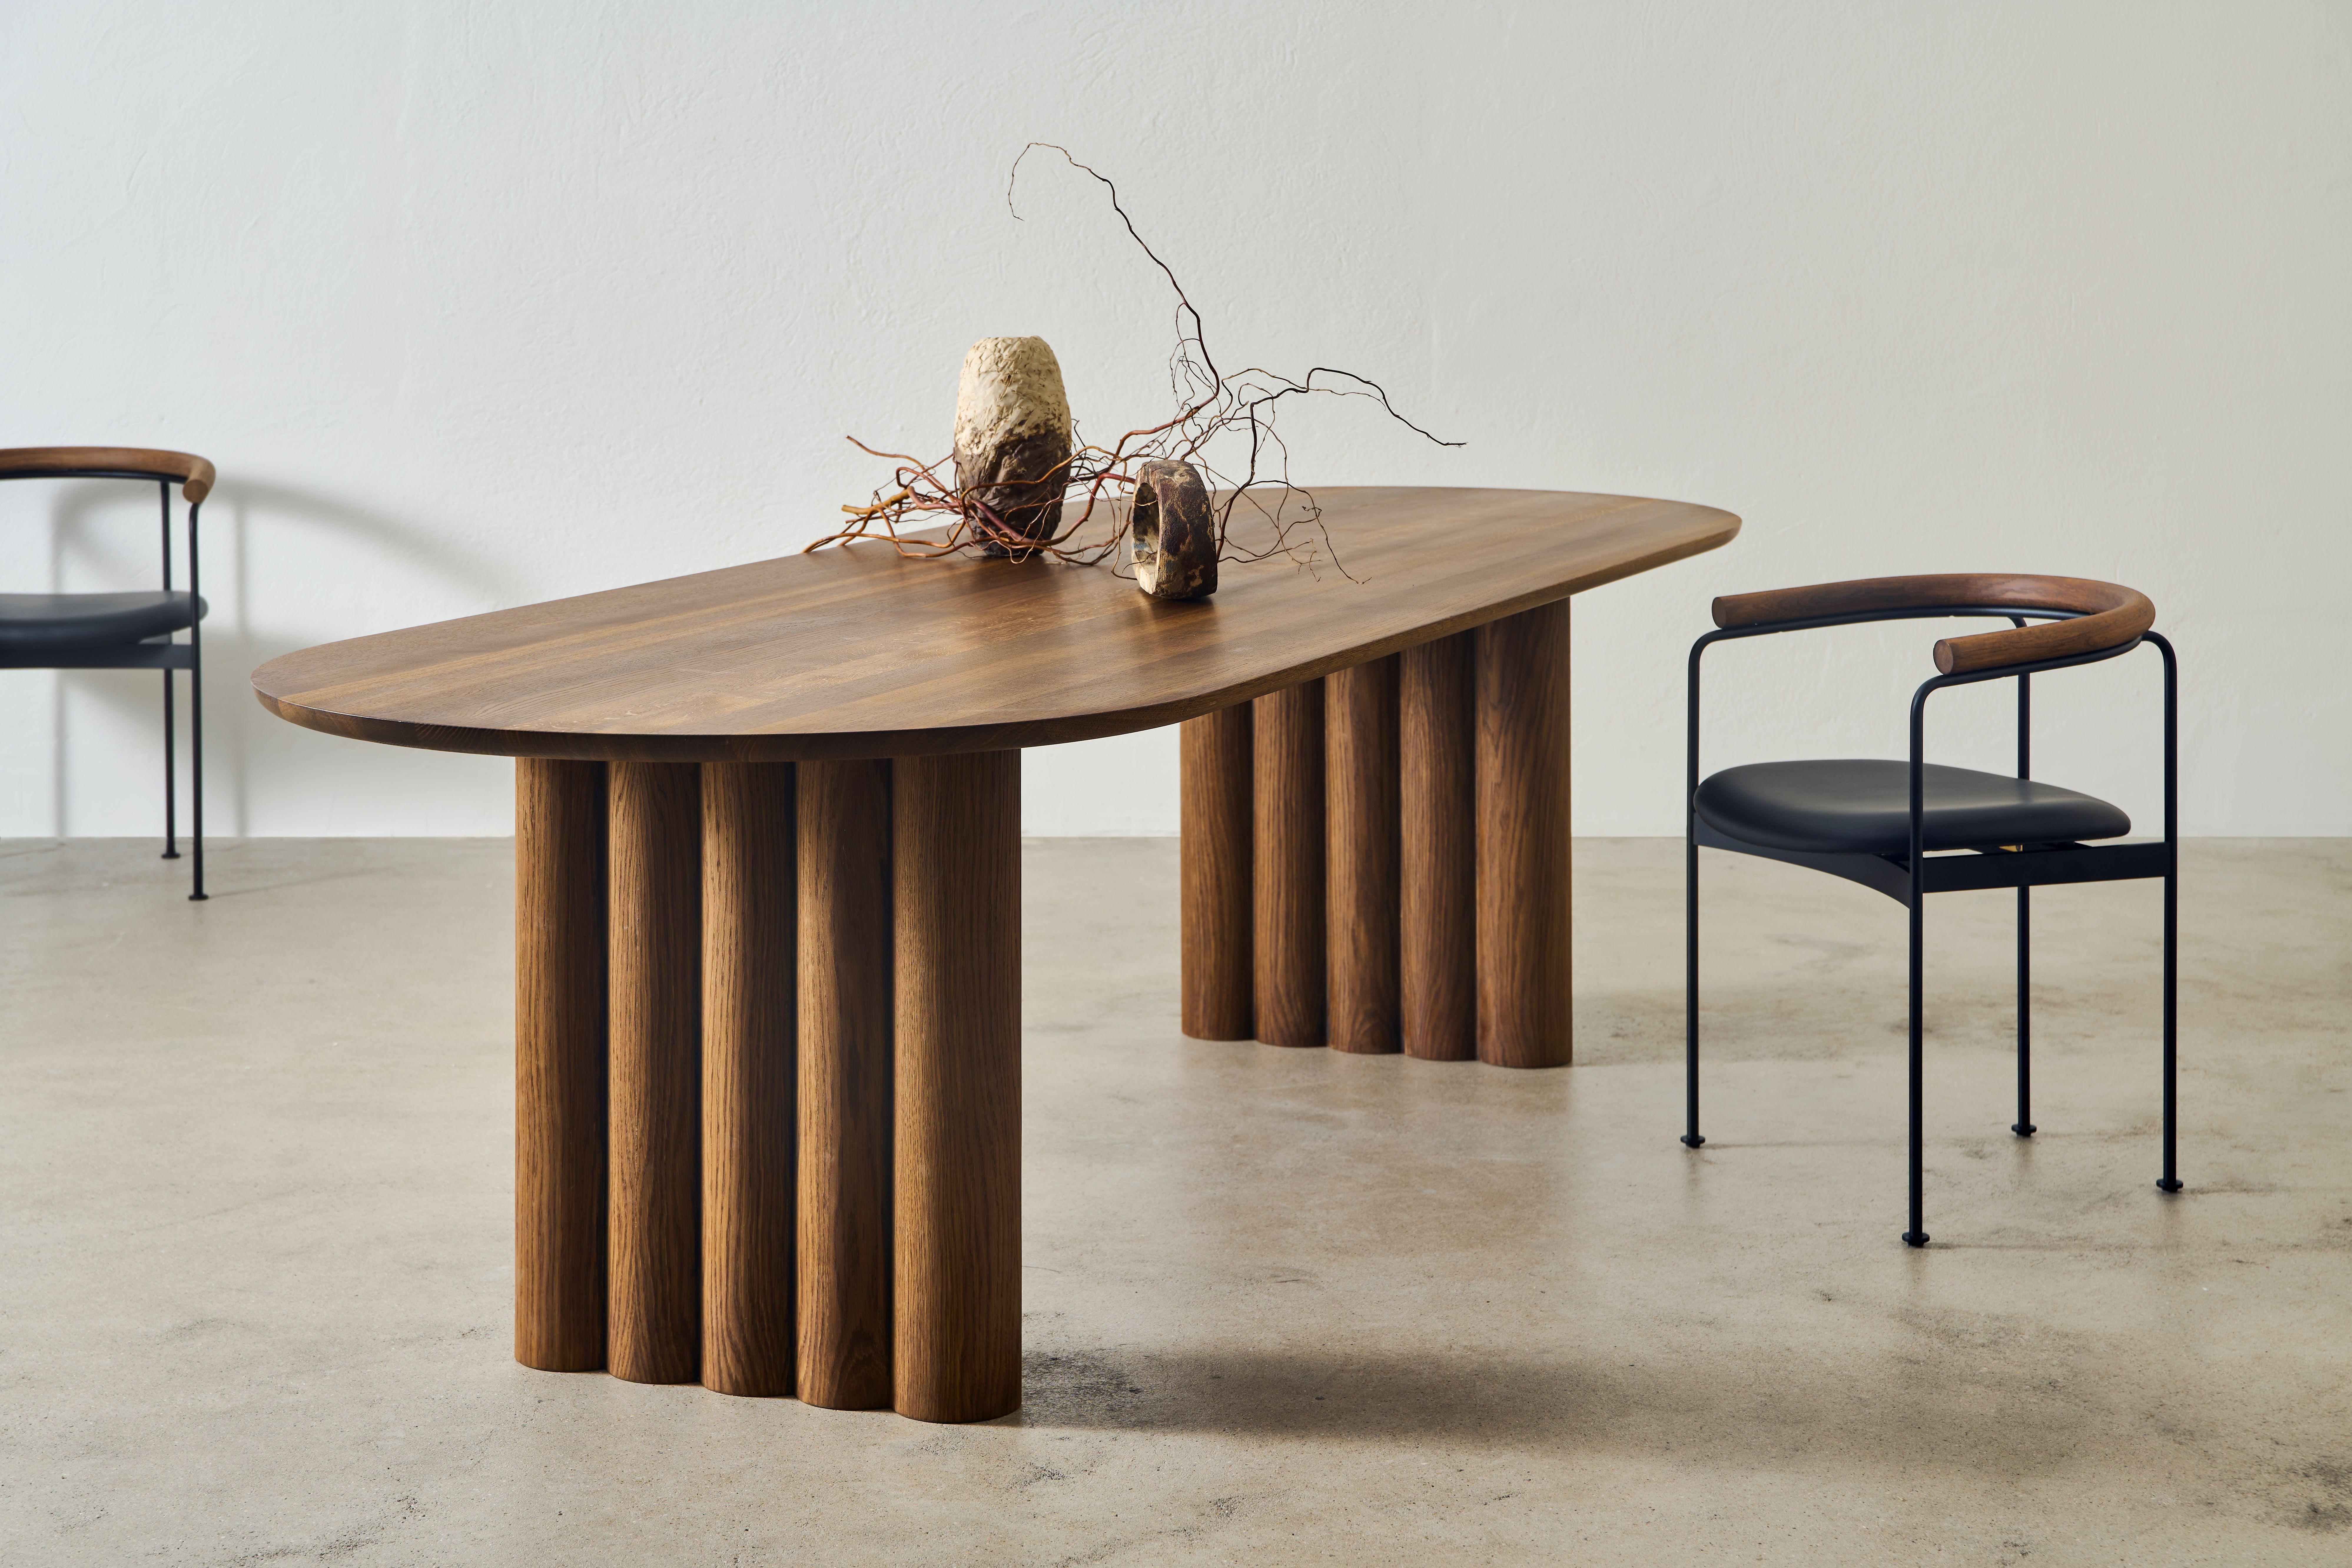 PLUSH dining table, oval, 400 cm.
Solid wood table top and legs. Handmade in Denmark. 
Signed by Jacob Plejdrup for DK3

Table's height: 72 or 74 cm
Table top’s thickness: 40mm
Legs width: 150mm

Table top dimensions:
– 200 x 100 cm
– 240 x 100 cm
–